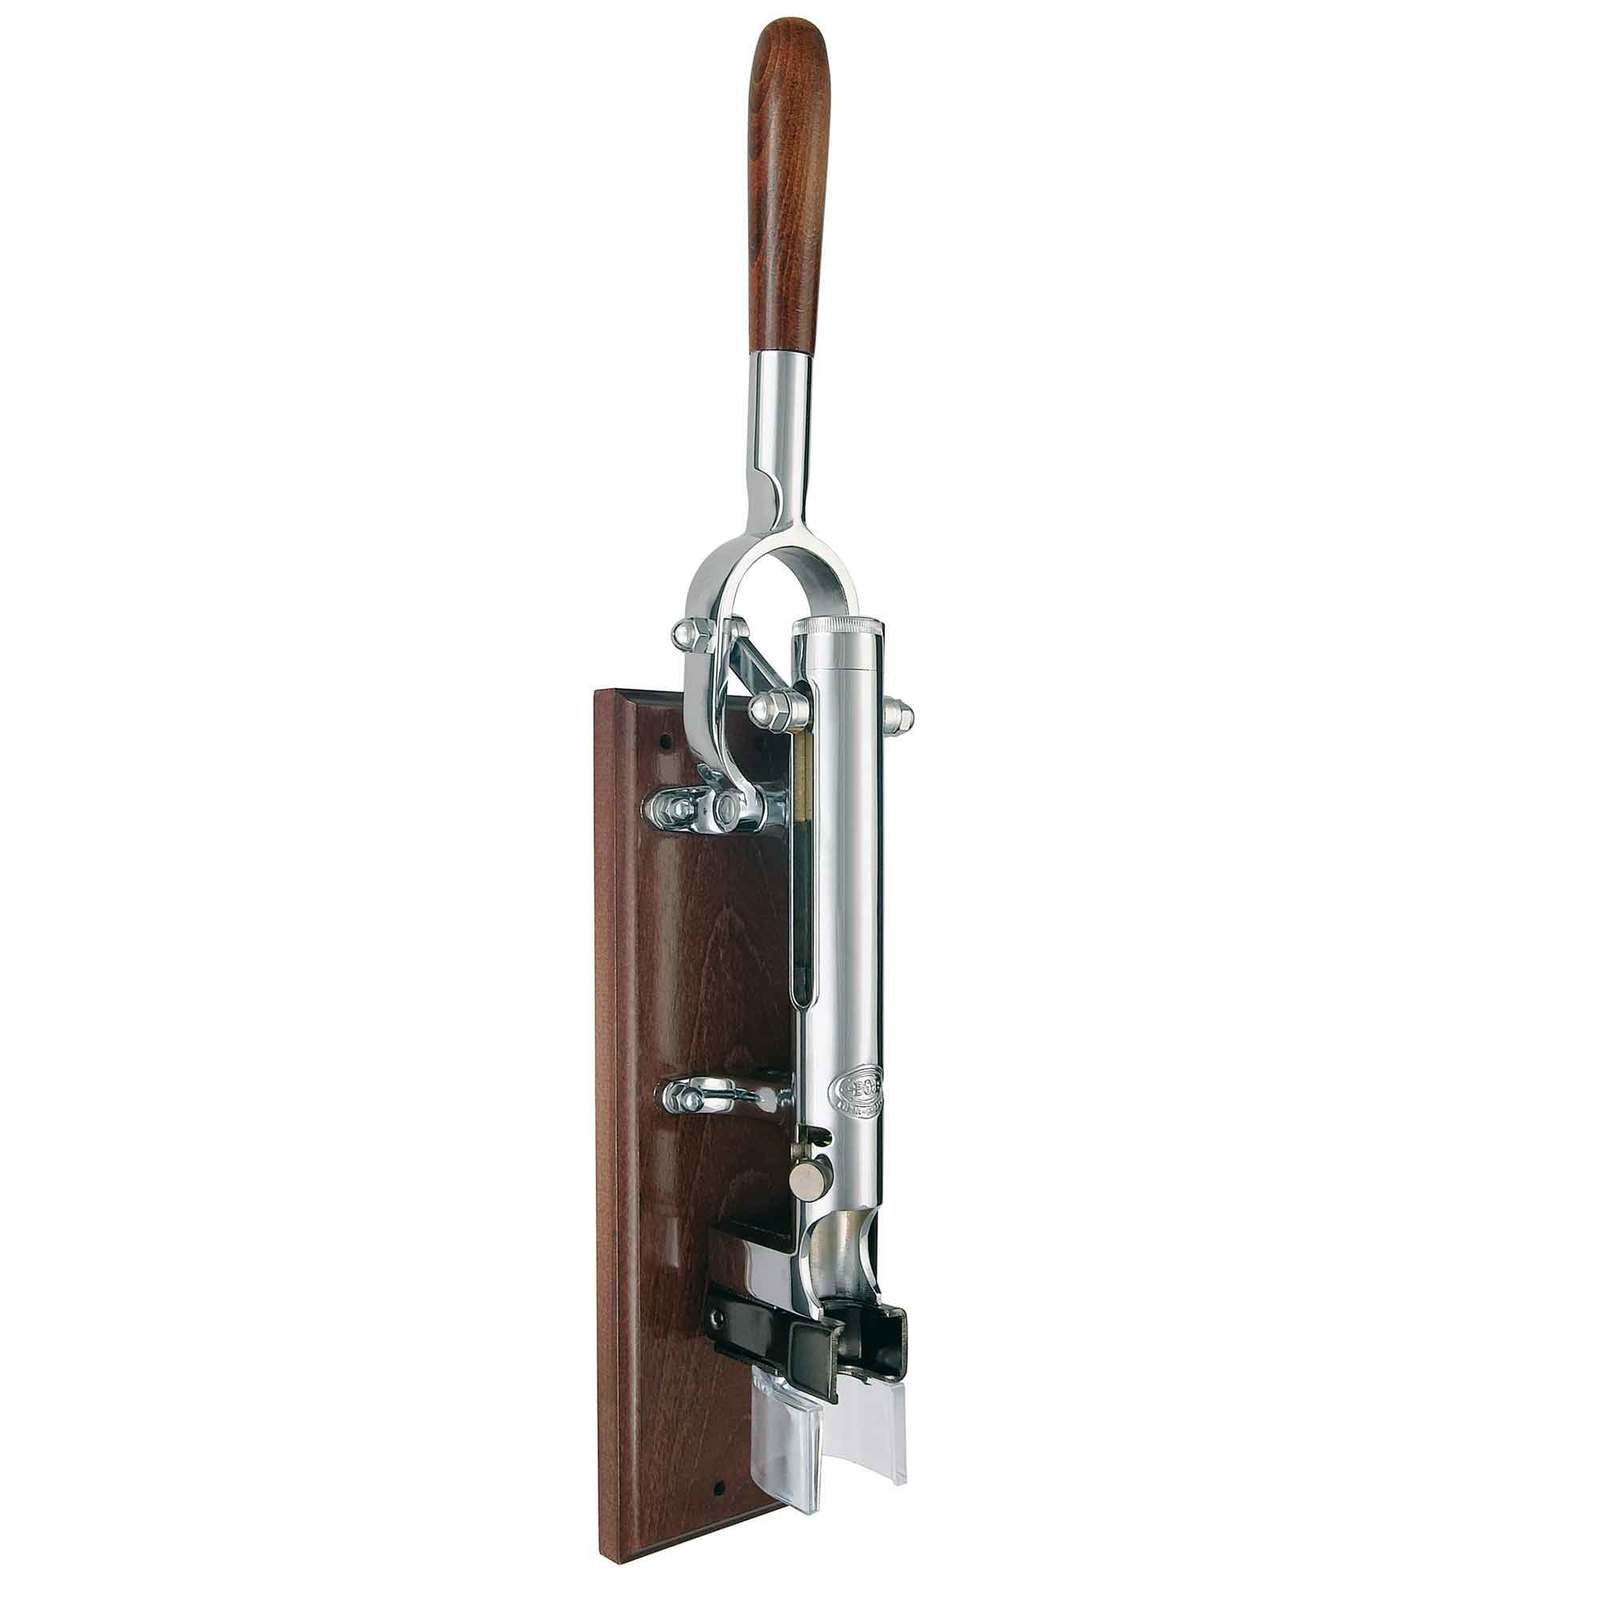 Primary image for BOJ 00992104 - Traditional Wall-Mounted Wine Opener W/Wood Stand - Chrome Plated